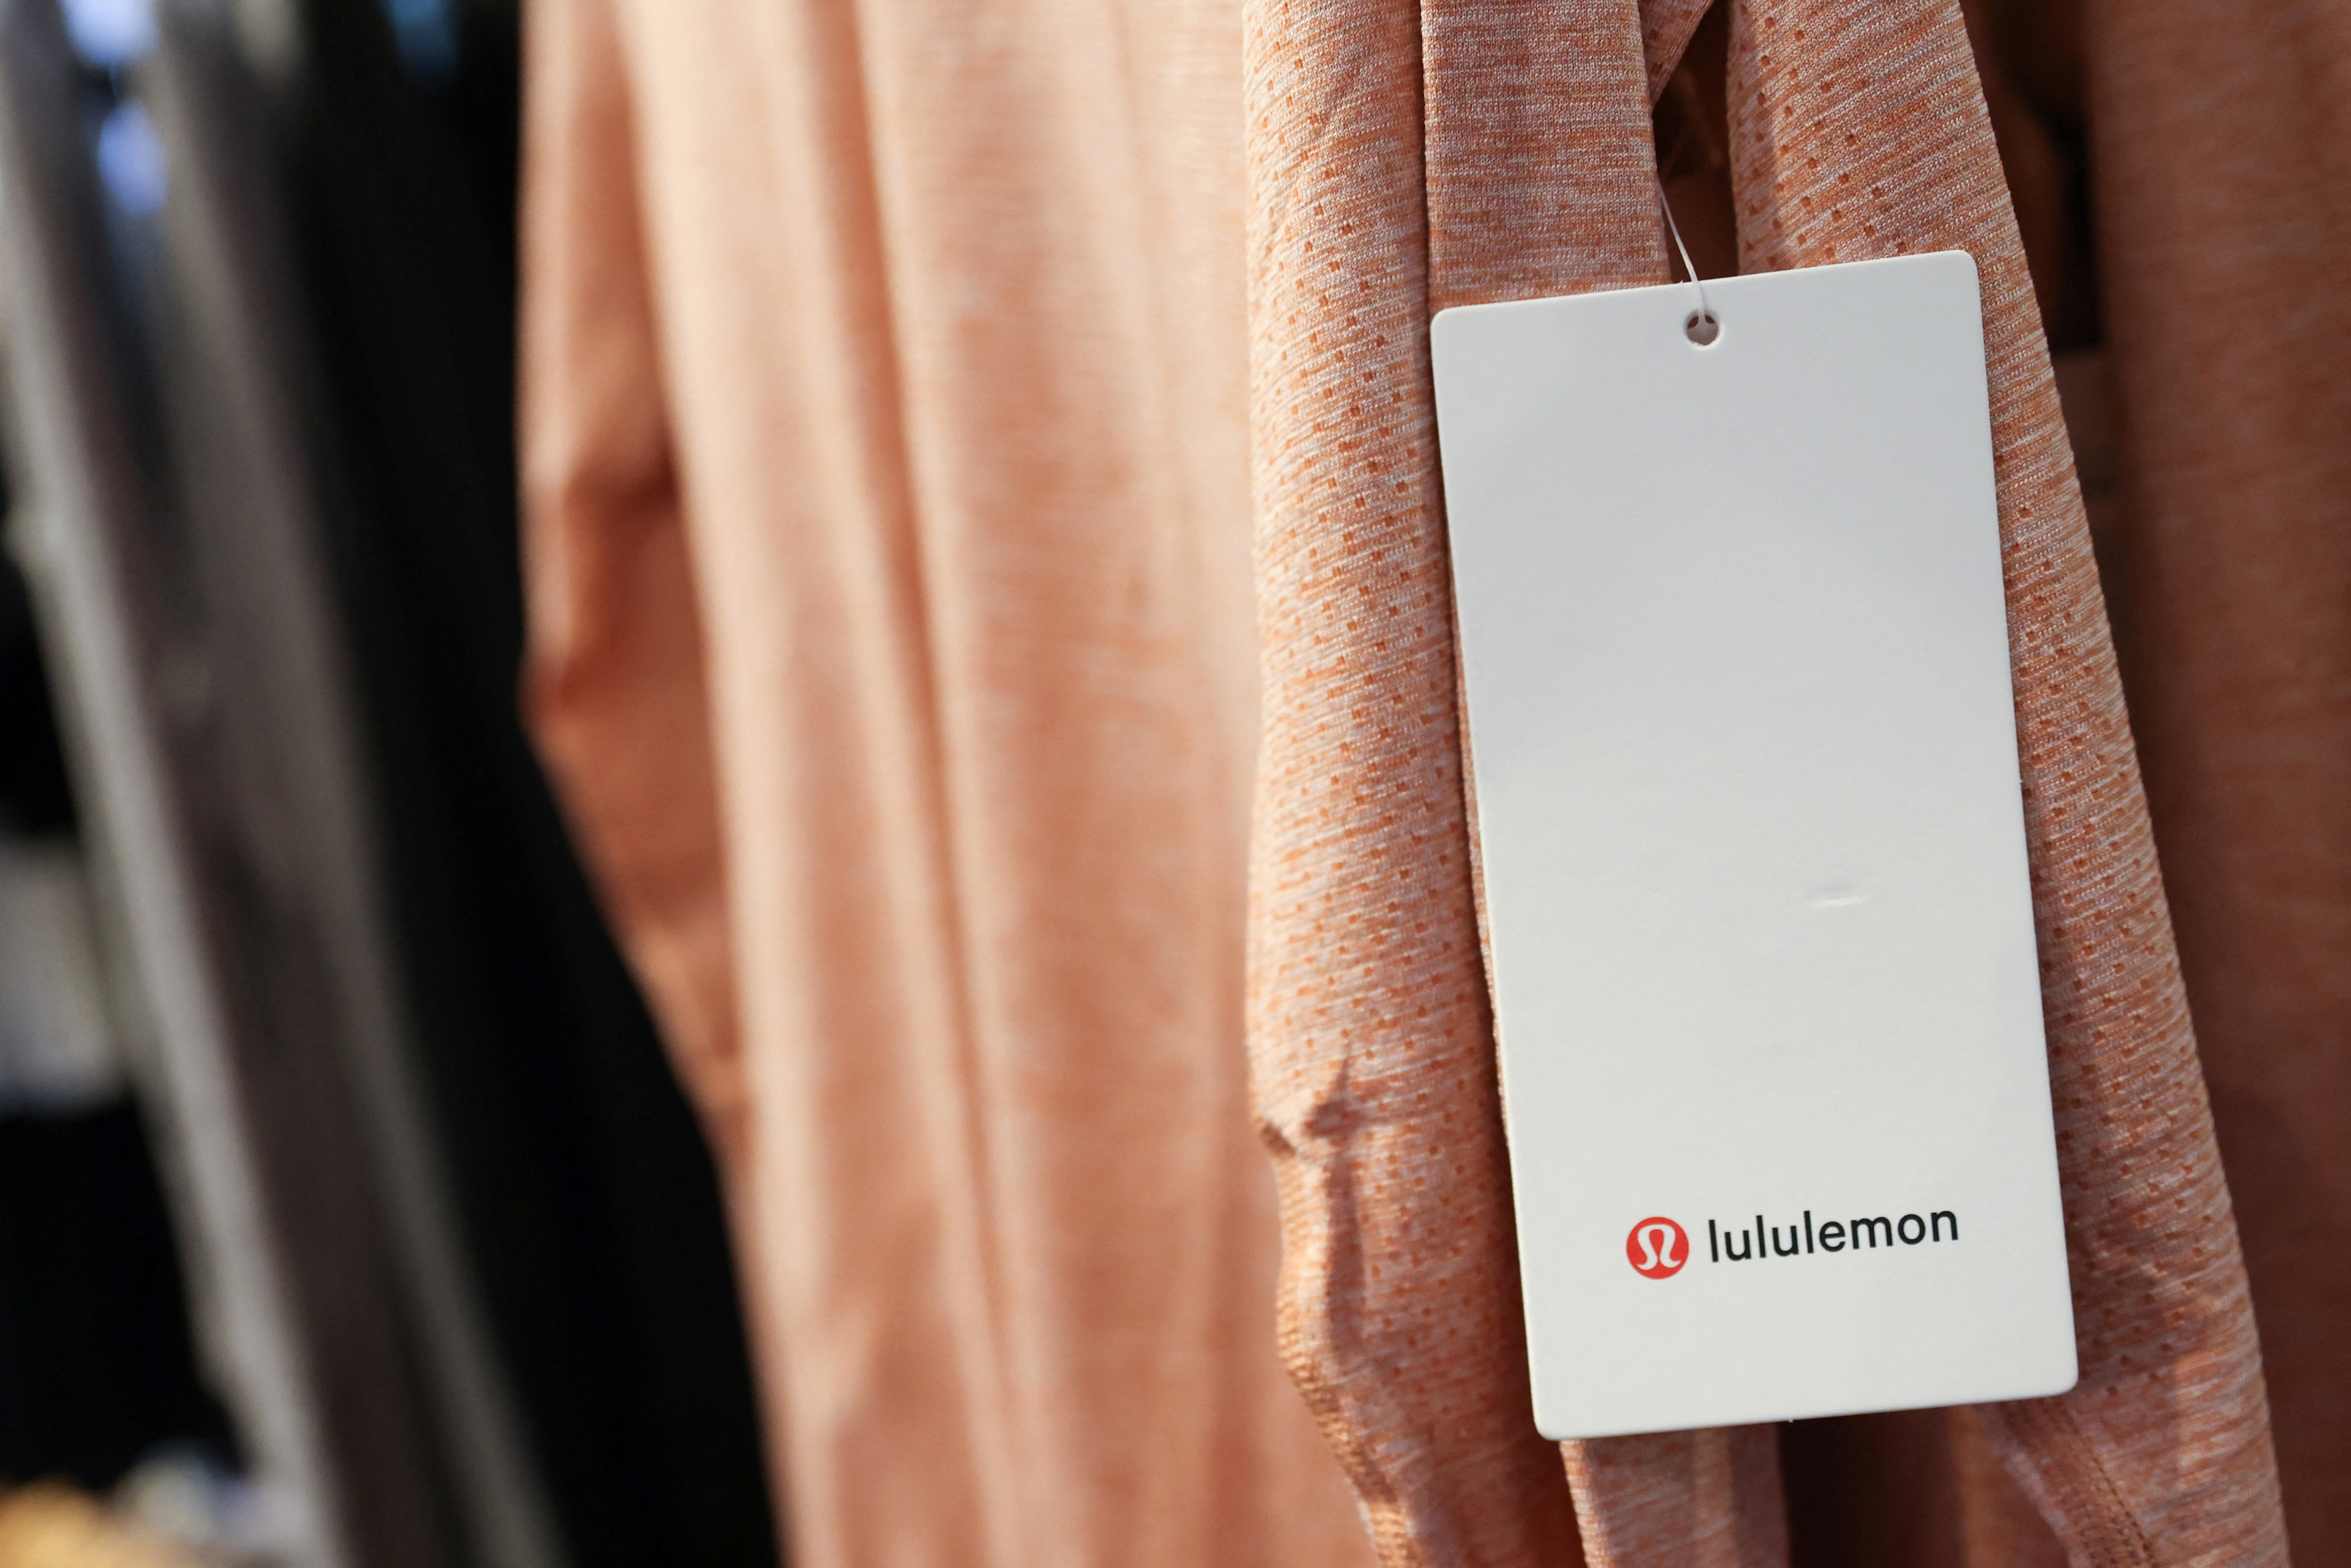 A tag is seen on clothing in a Lululemon Athletica store in Manhattan, New York